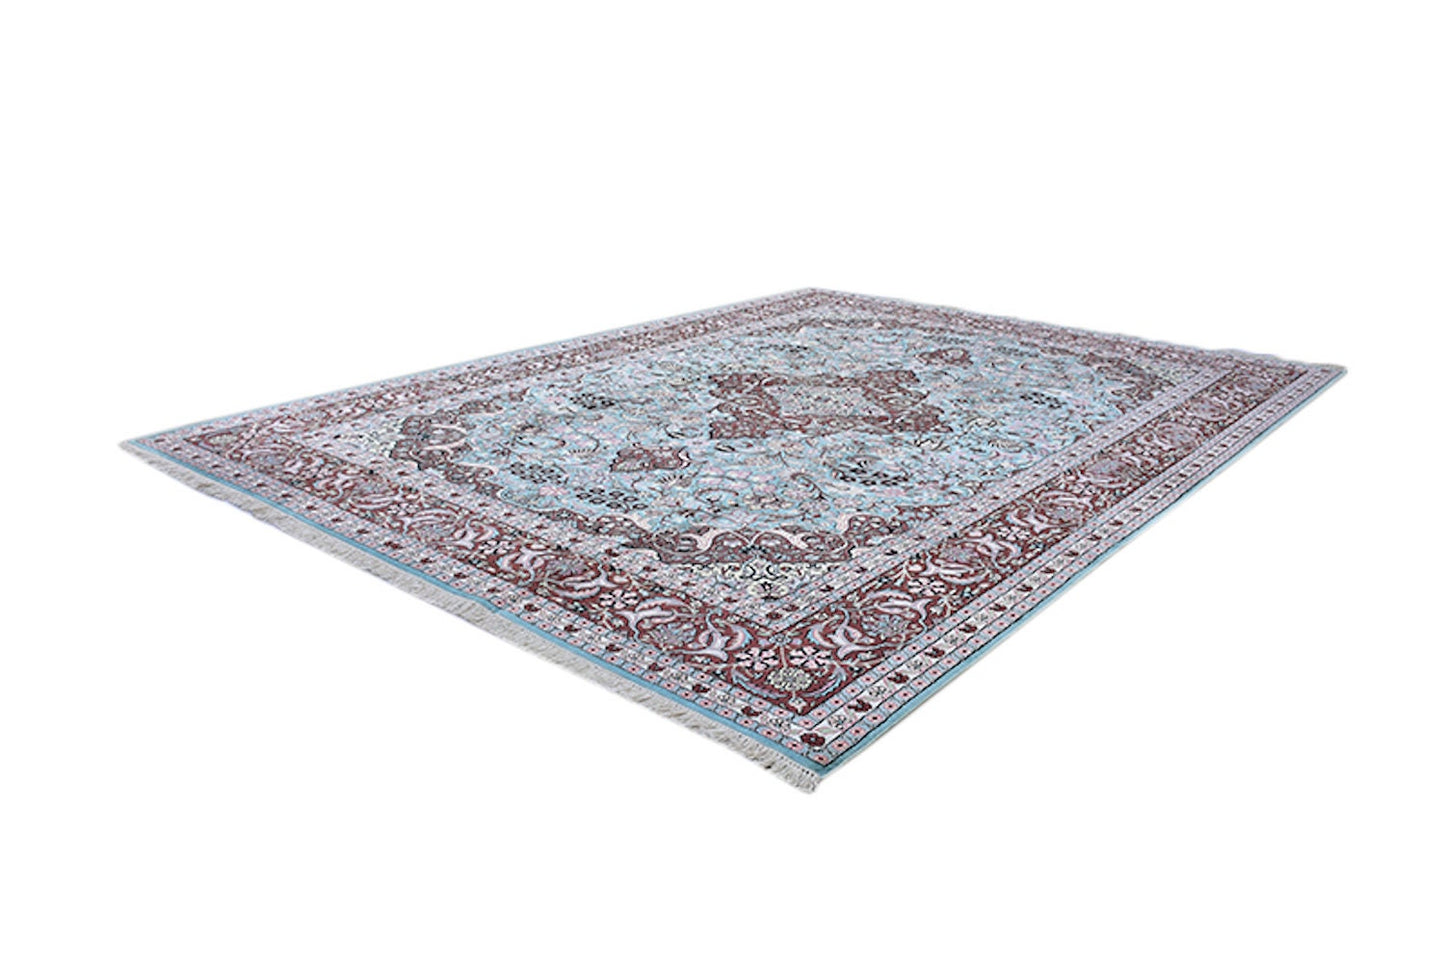 Pure Silk Handmade 9 x 12 ft Rug | Handwoven Area Large Persian Style Kashmiri Rug | Soft Pile | Light blue and Red Antique Rug